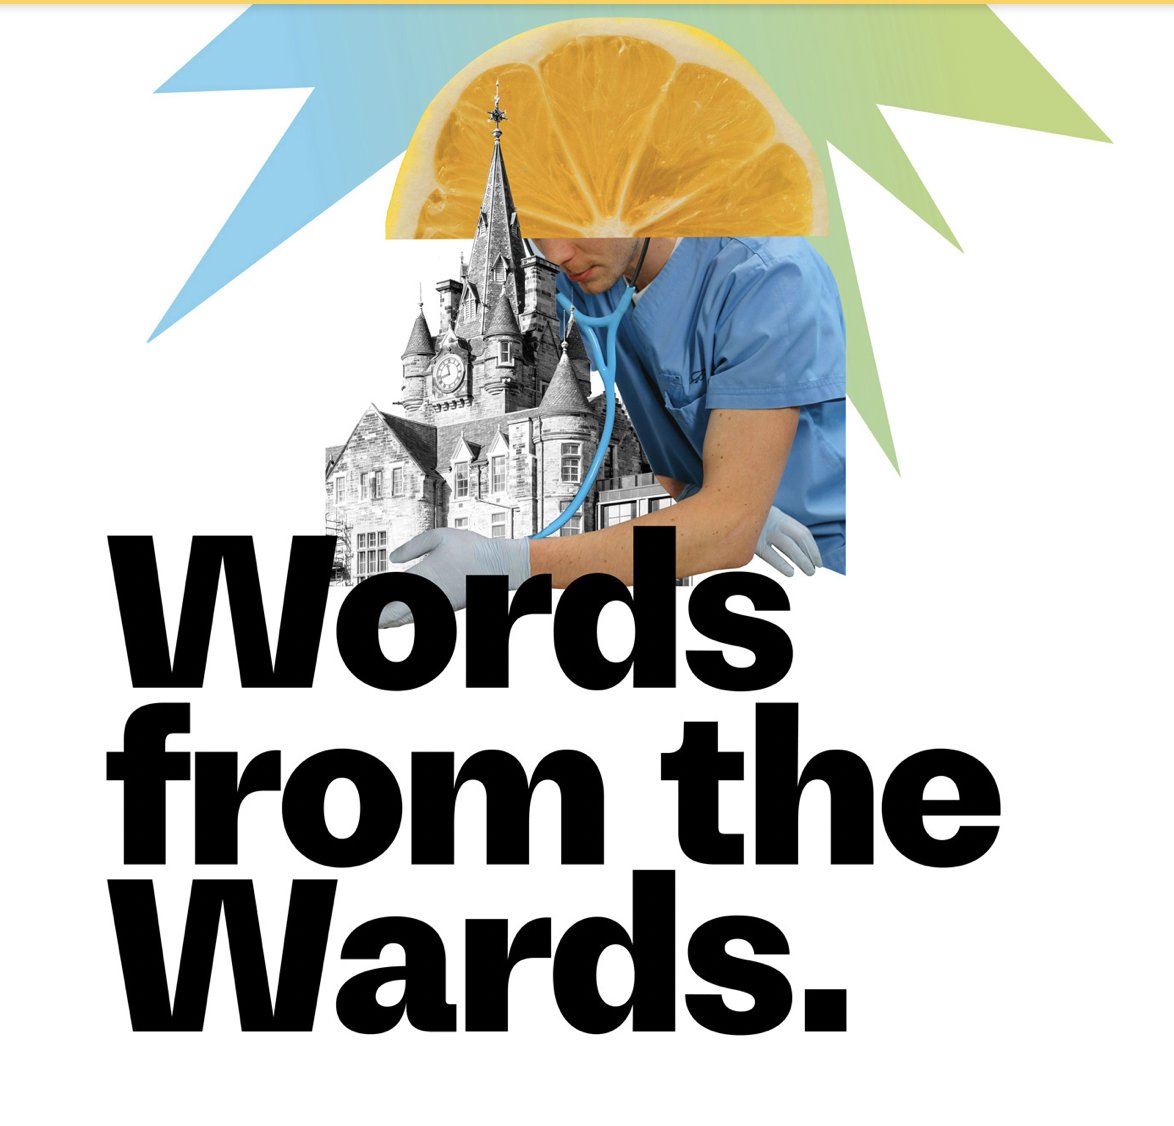 WORDS FROM THE WARDS Edinburgh Book Festival have launched a call out for stories, memories and anecdotes about the Old Royal Infirmary on Lauriston Place. This summer @edbookfest will move to their new home at Edinburgh Futures Institute (the former Royal Infirmary). They…